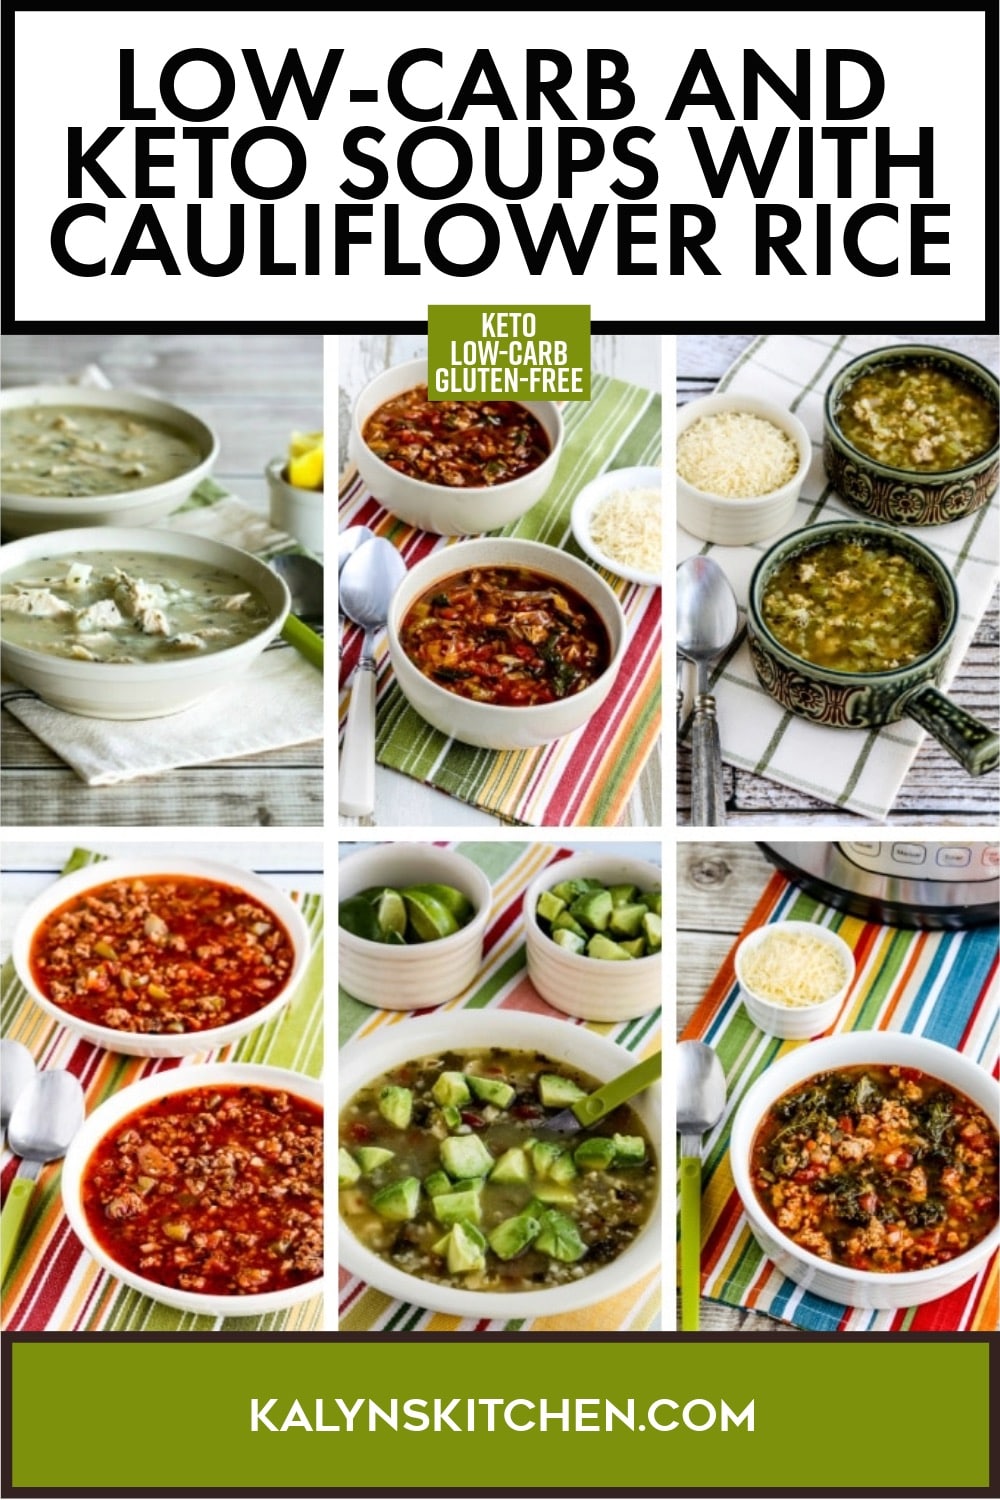 Pinterest image of Low-Carb and Keto Soups with Cauliflower Rice